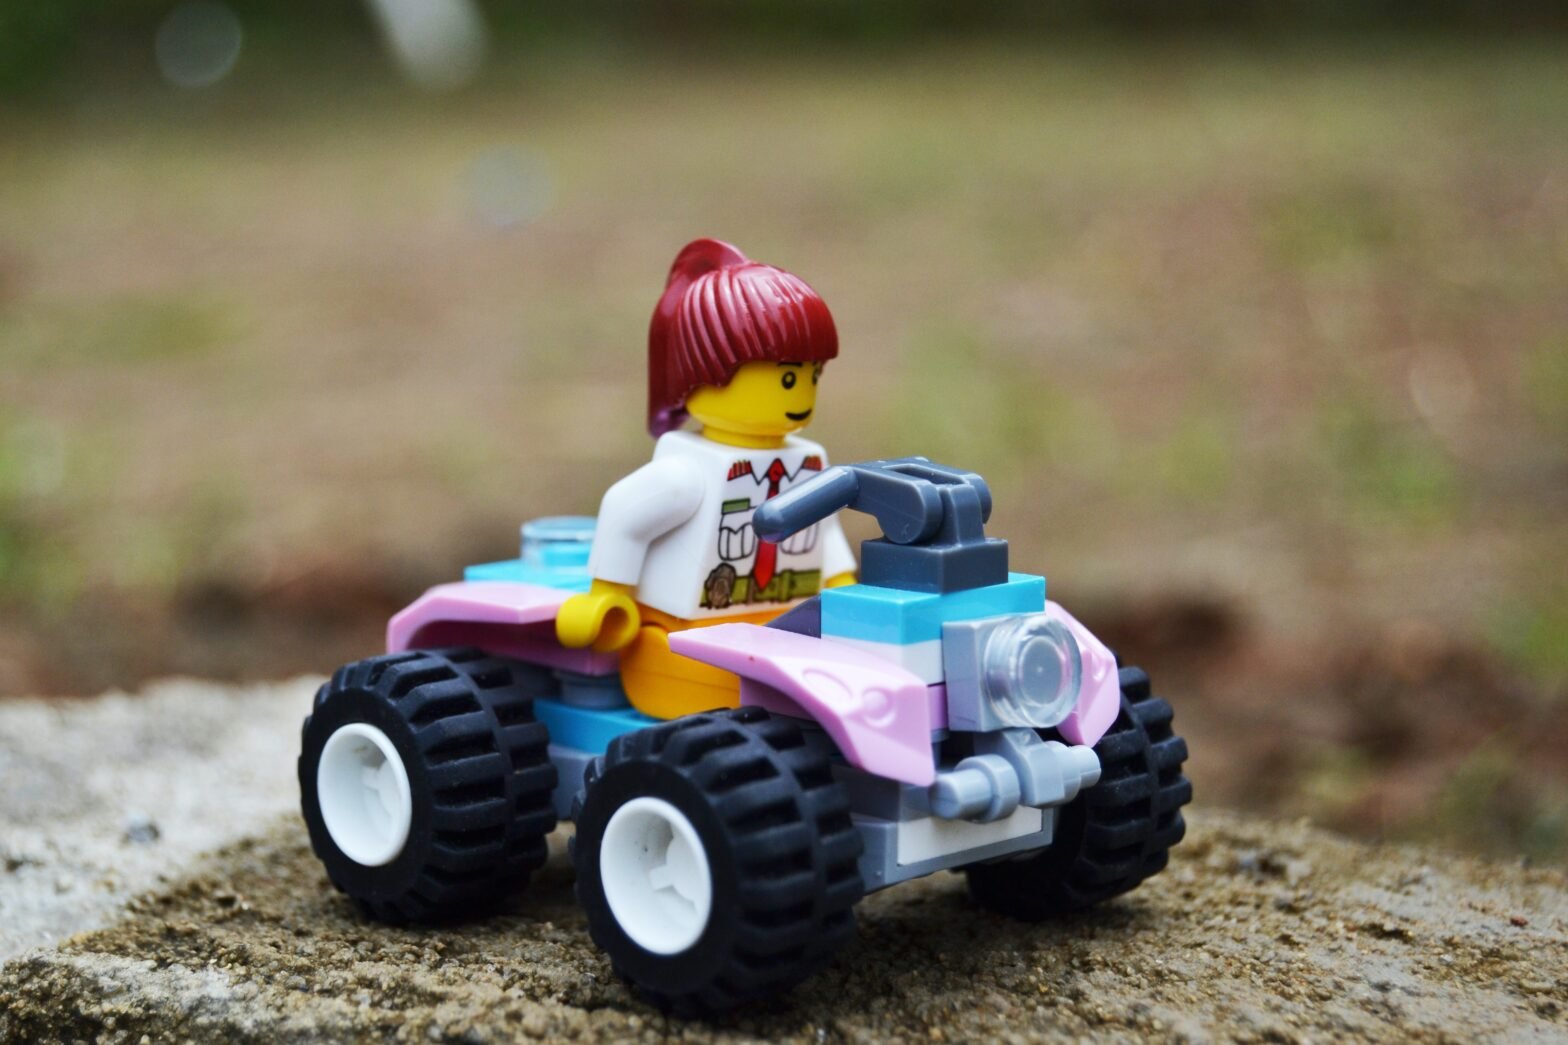 lego employees share 10 secrets for finding boundless creativity 3